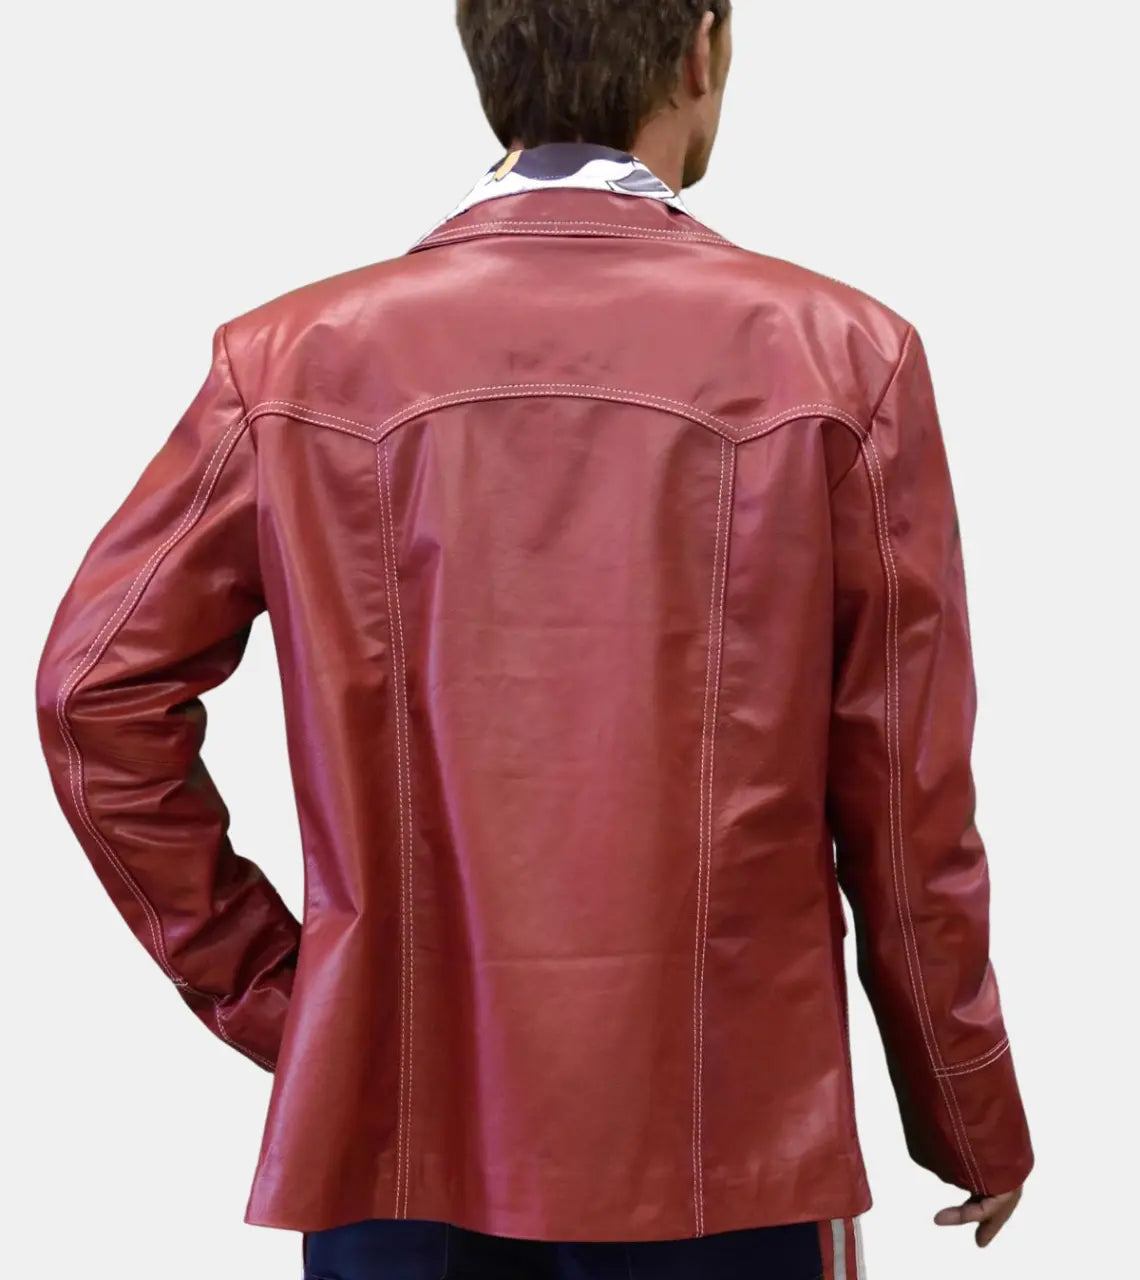 Outlaw Red Biker Leather Jacket